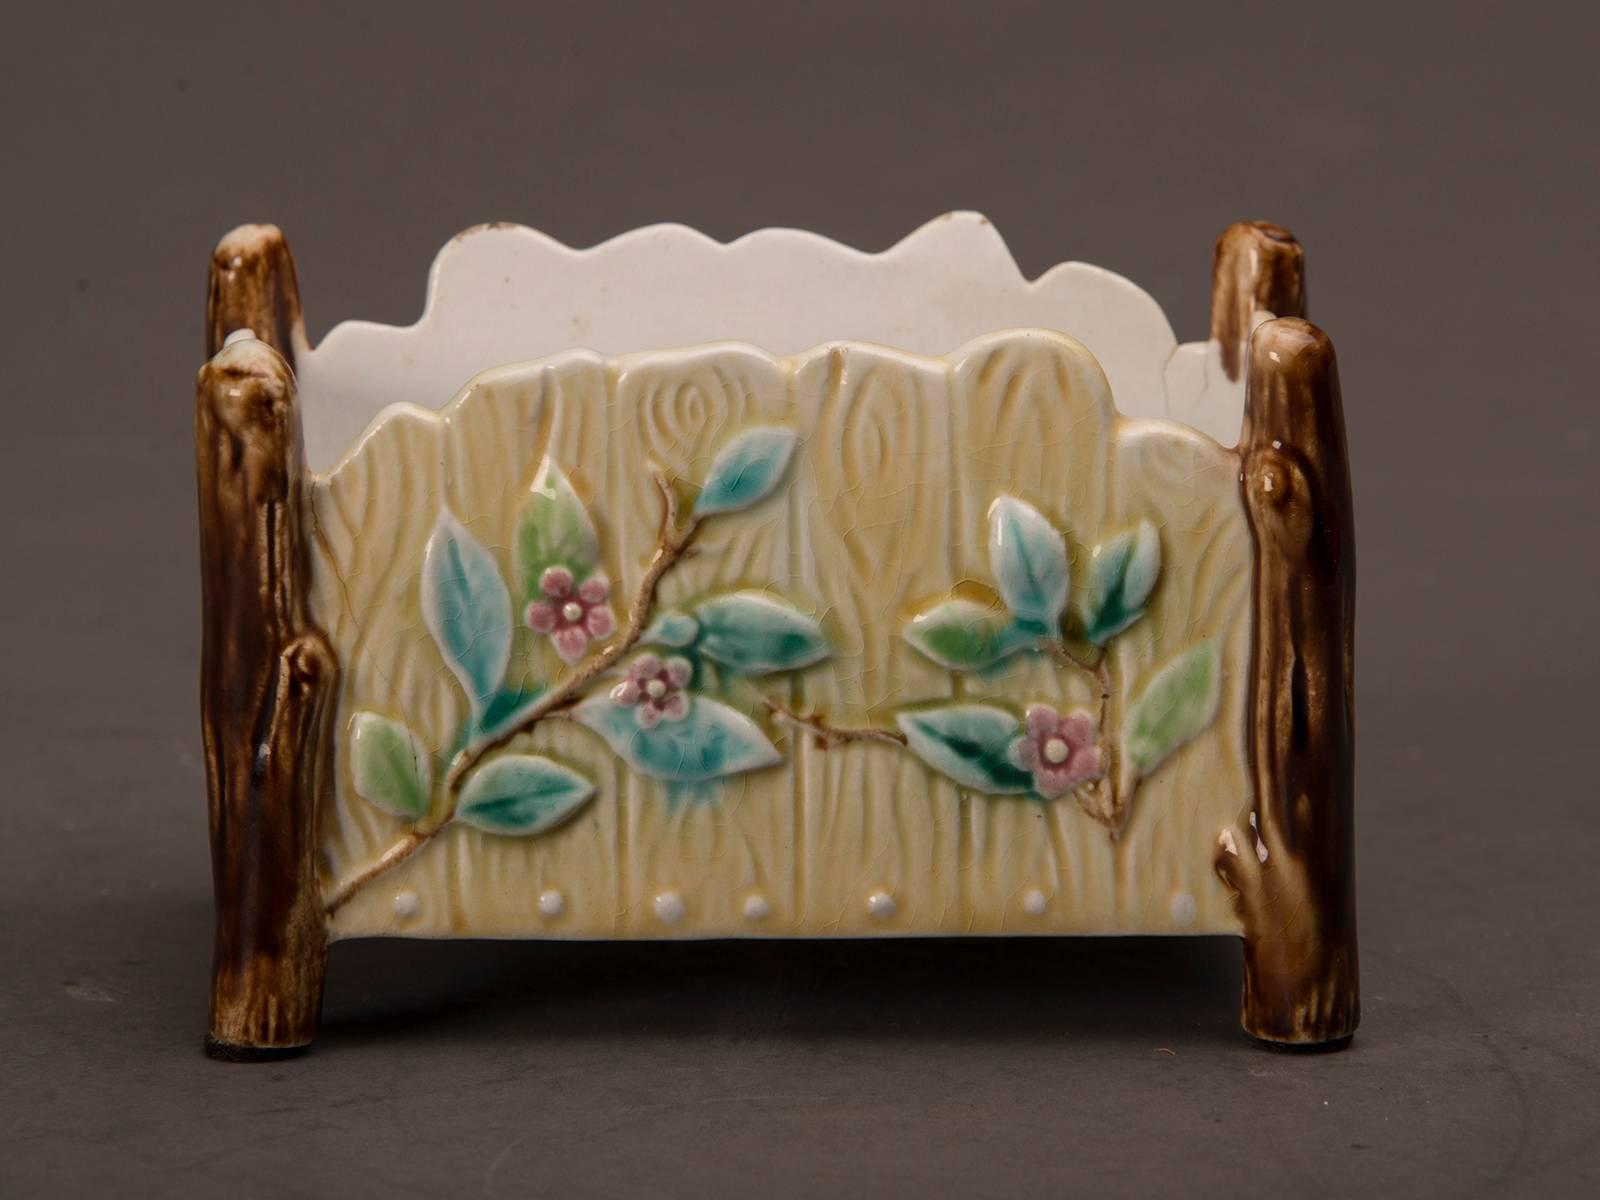 A charming antique French Majolica Barbotine ware glazed ceramic cachepot garden flower pot from France, circa 1890. This tabletop container for a small plant is rectangular in shape and finished on all four sides. The complementary colors and